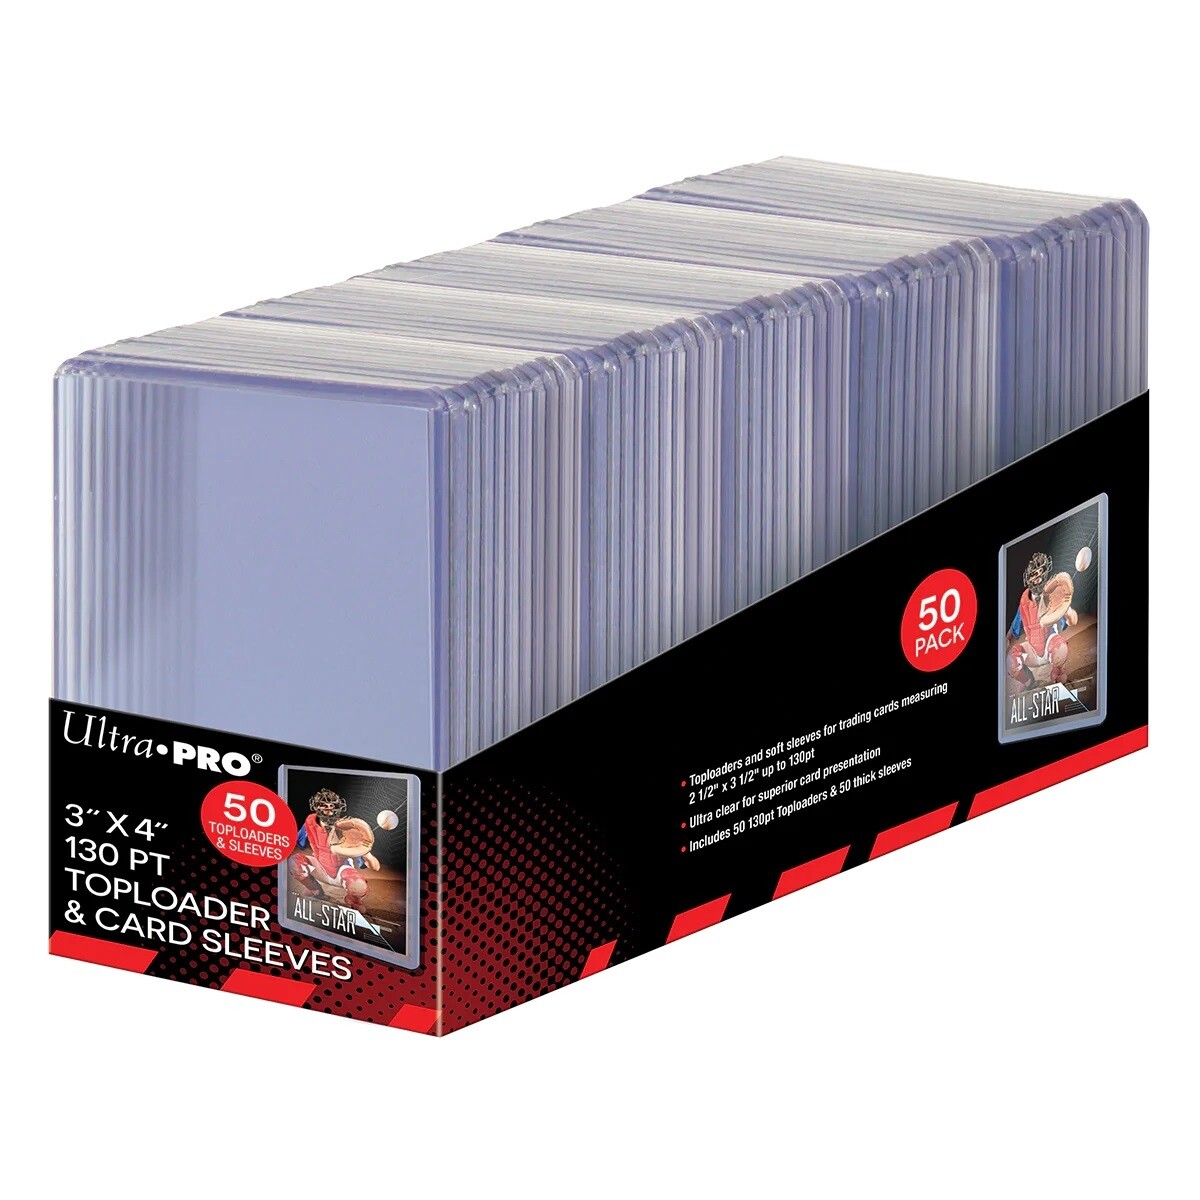 Ultra Pro - 3" x 4" Super Thick 130pt Toploaders & Thick Card Sleeves (50ct)